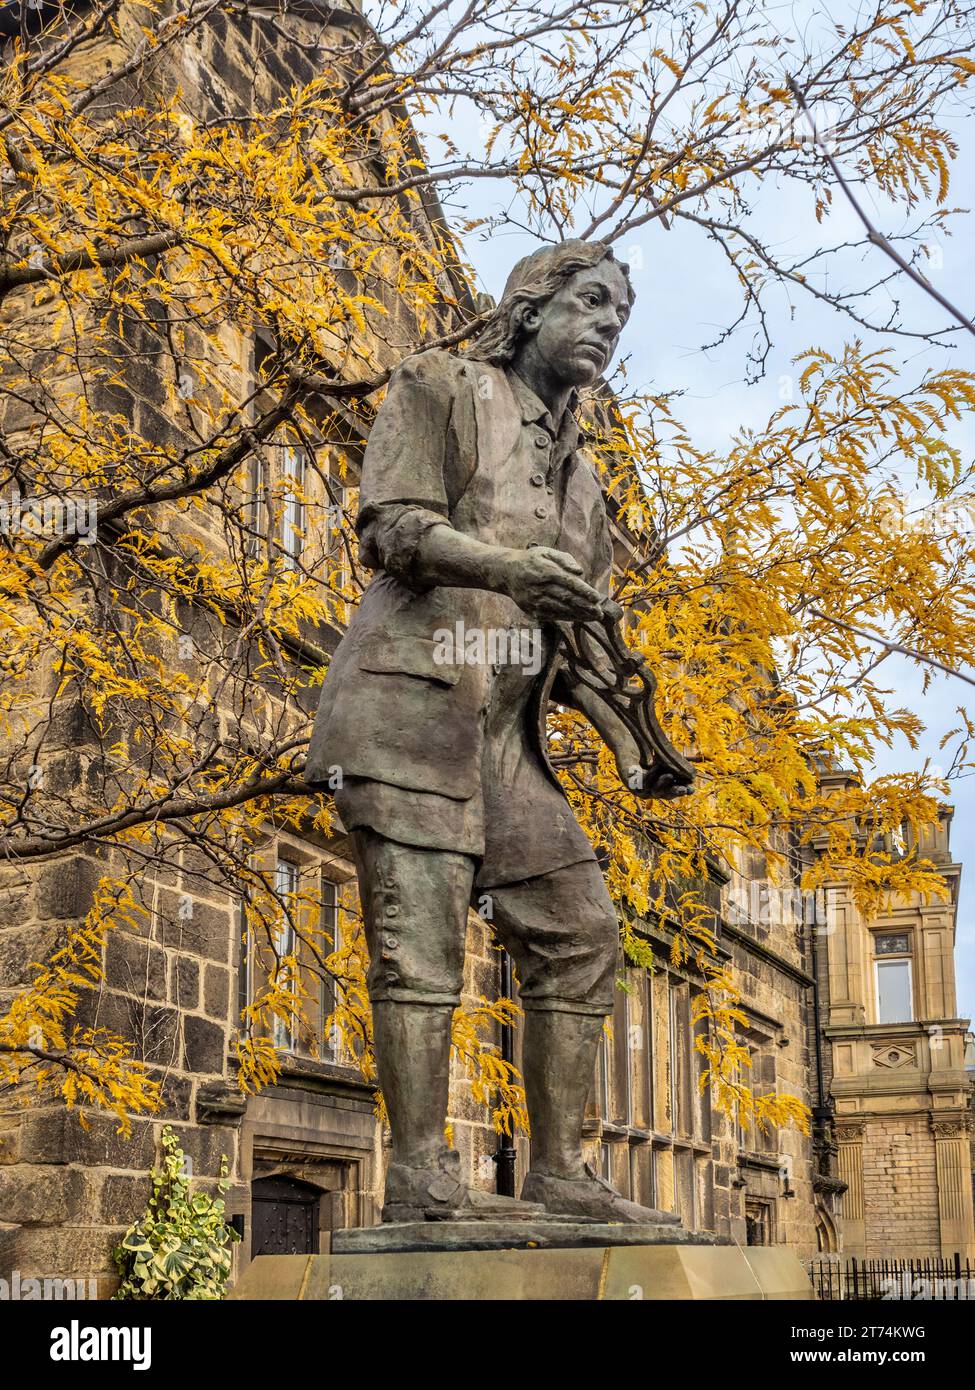 Statue of Thomas Chippendale, the renowned furniture maker, in Clapgate, Otley, by sculptor Graham Ibbeson Stock Photo